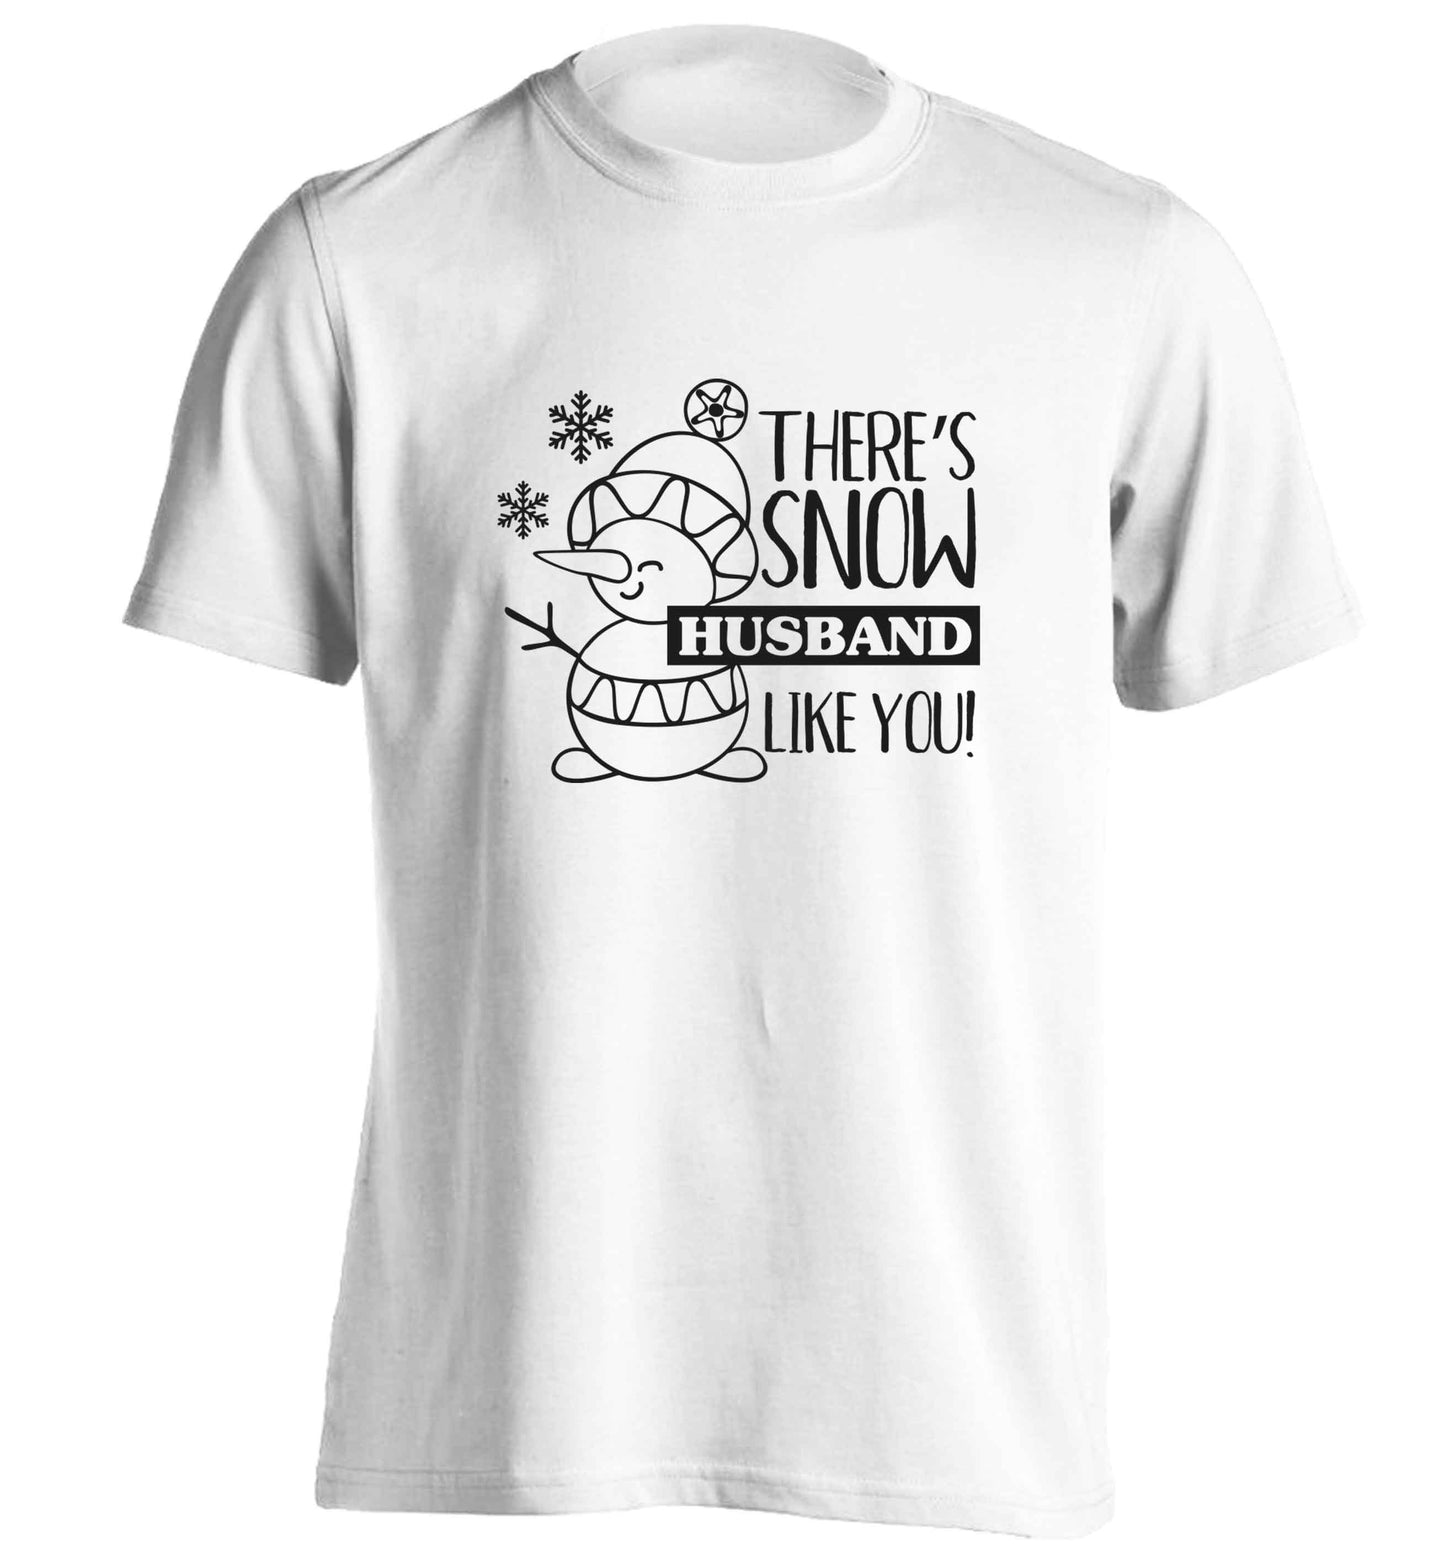 There's snow husband like you adults unisex white Tshirt 2XL